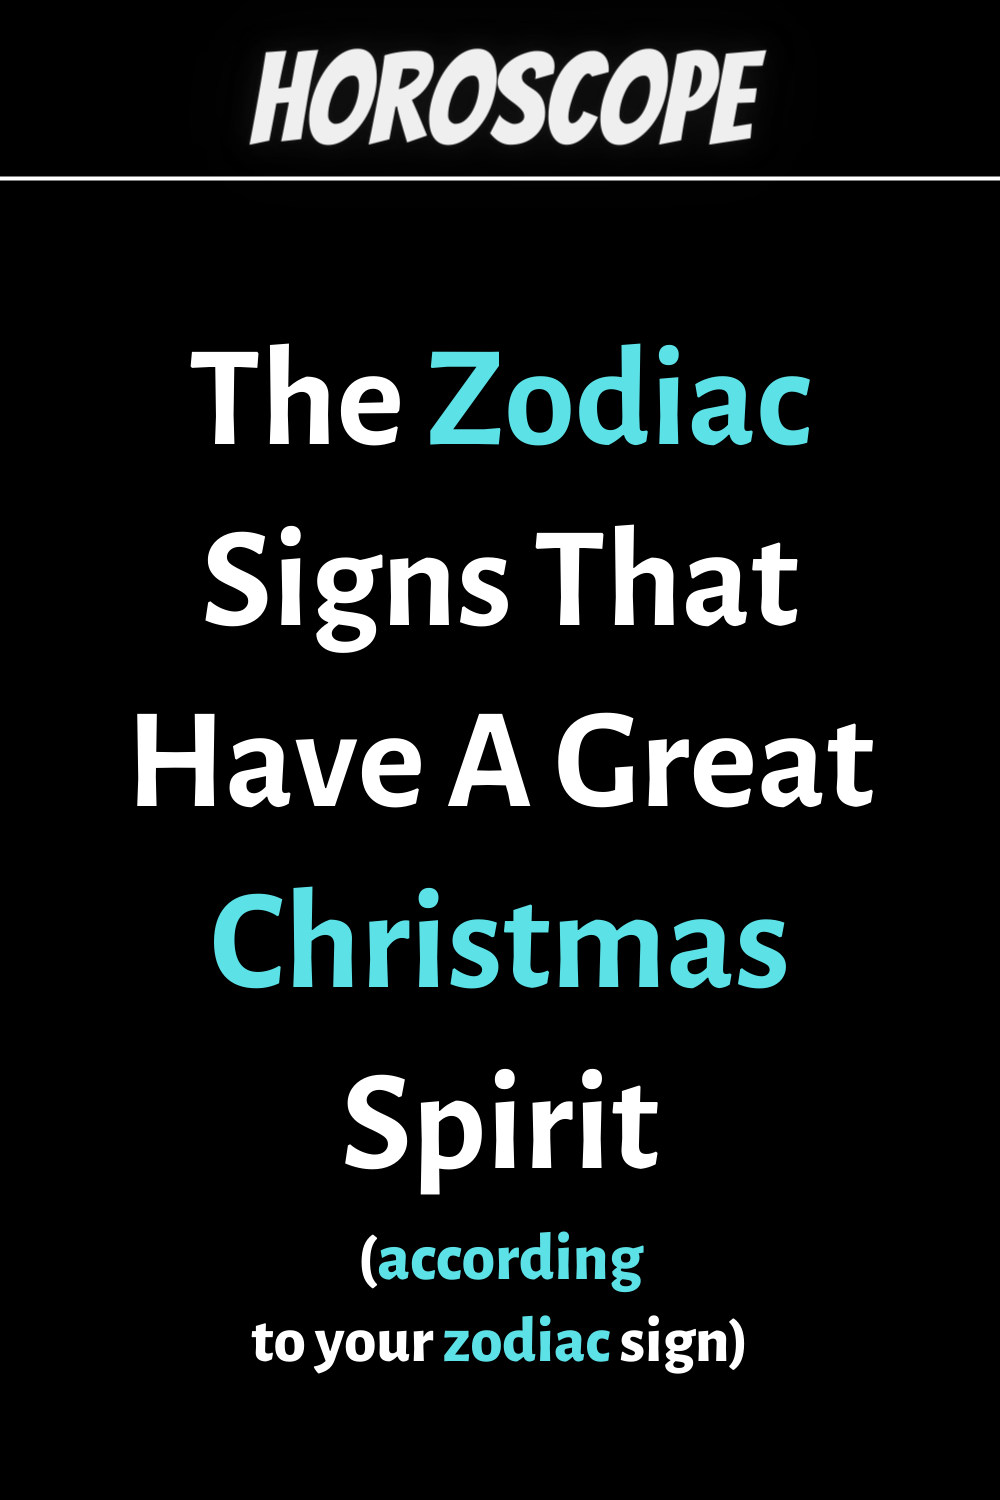 The Zodiac Signs That Have A Great Christmas Spirit